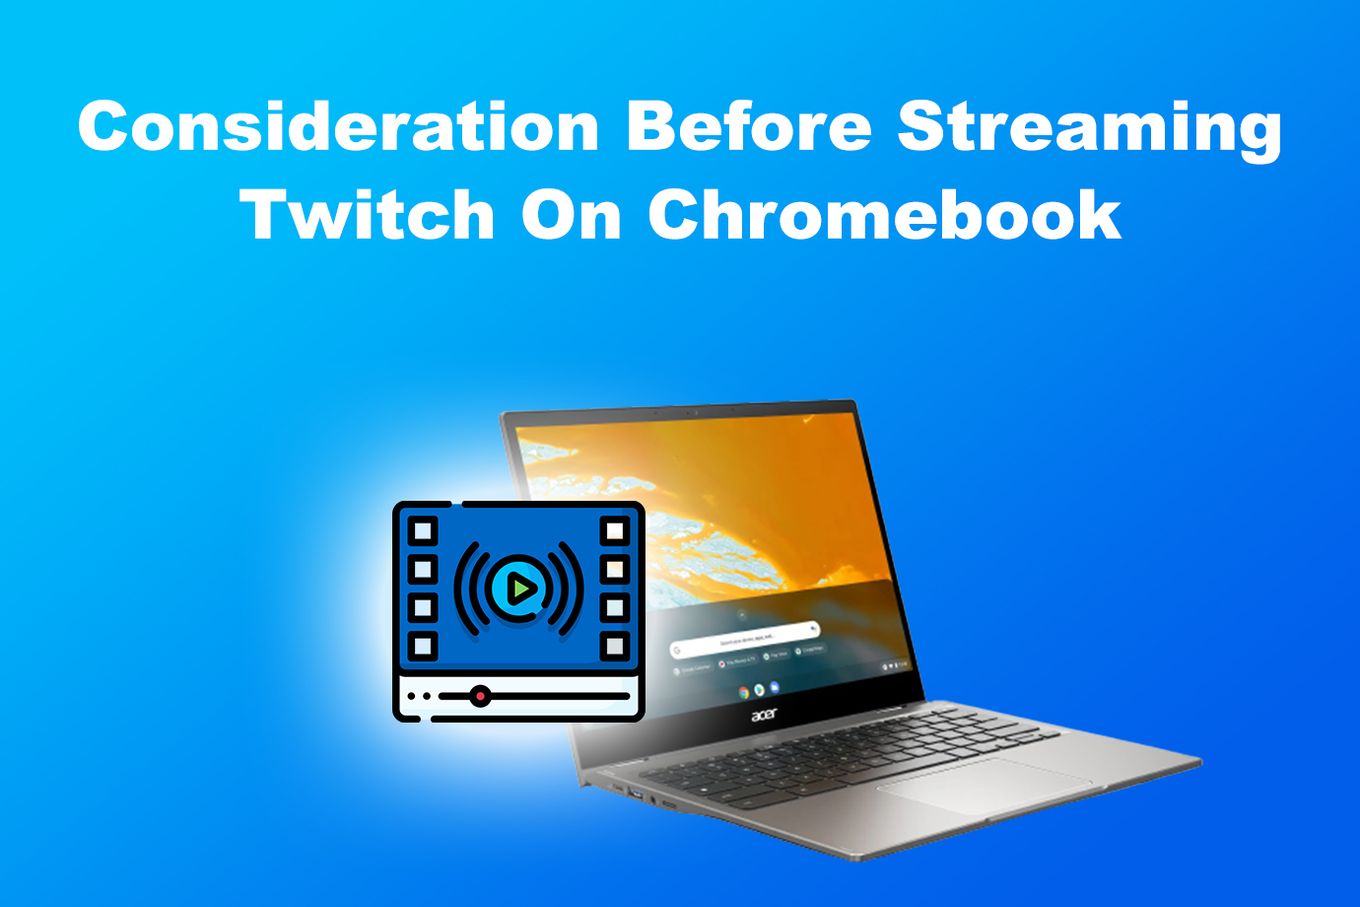 Consideration Before Streaming Twitch On Chromebook